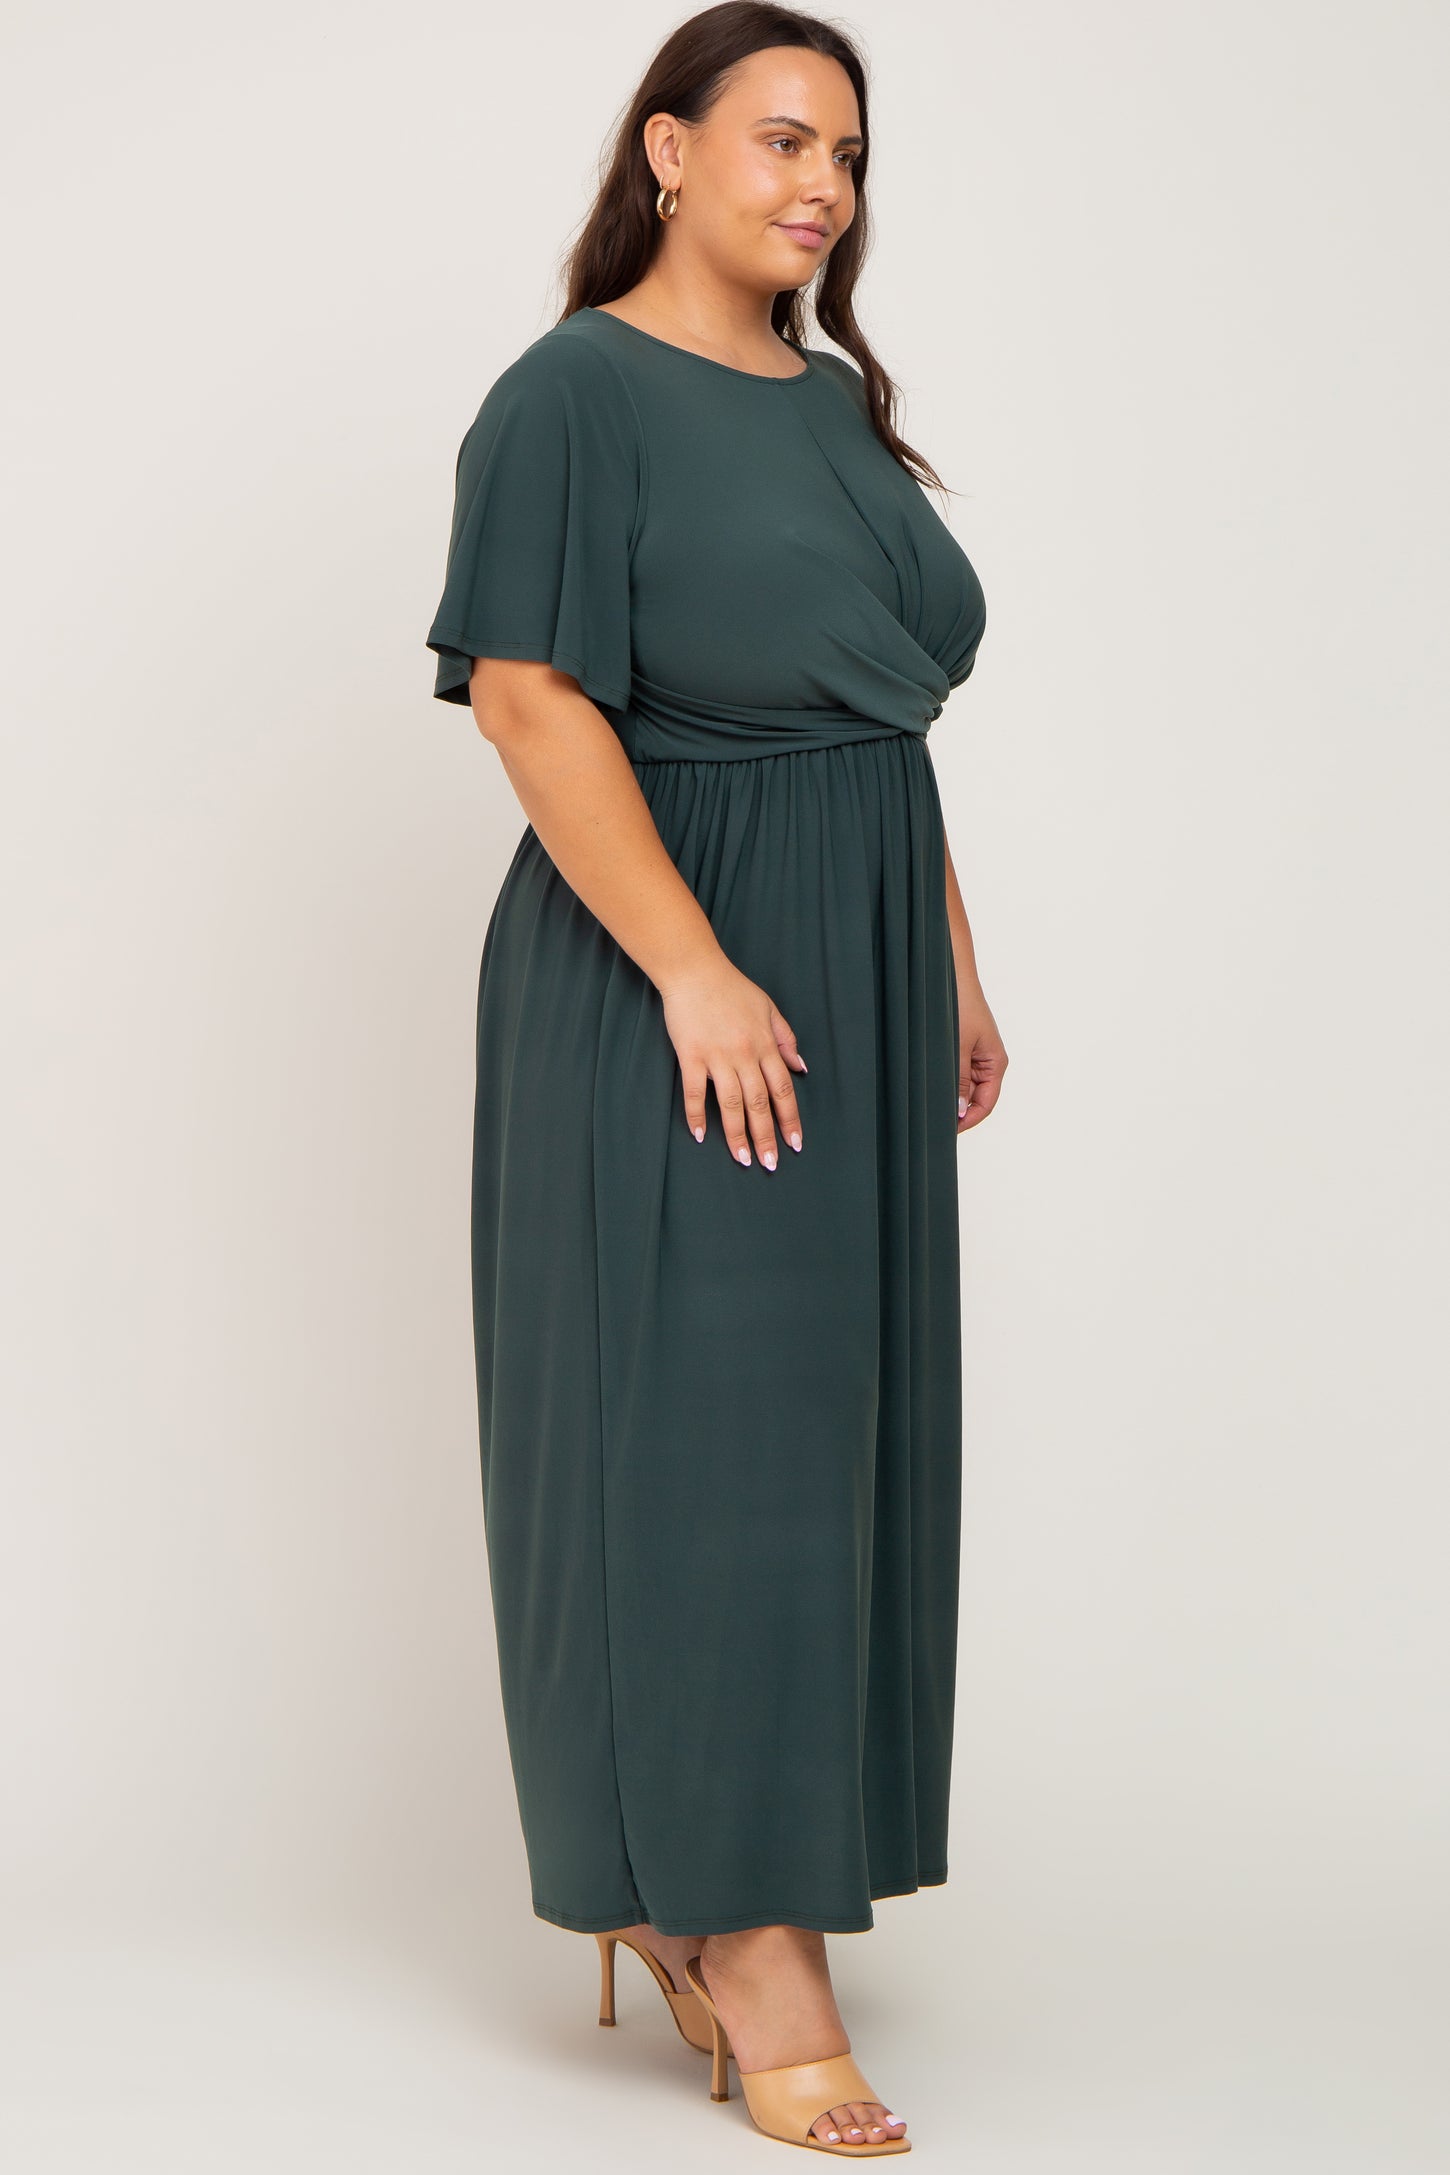 Olive Gathered Front Plus Maxi Dress